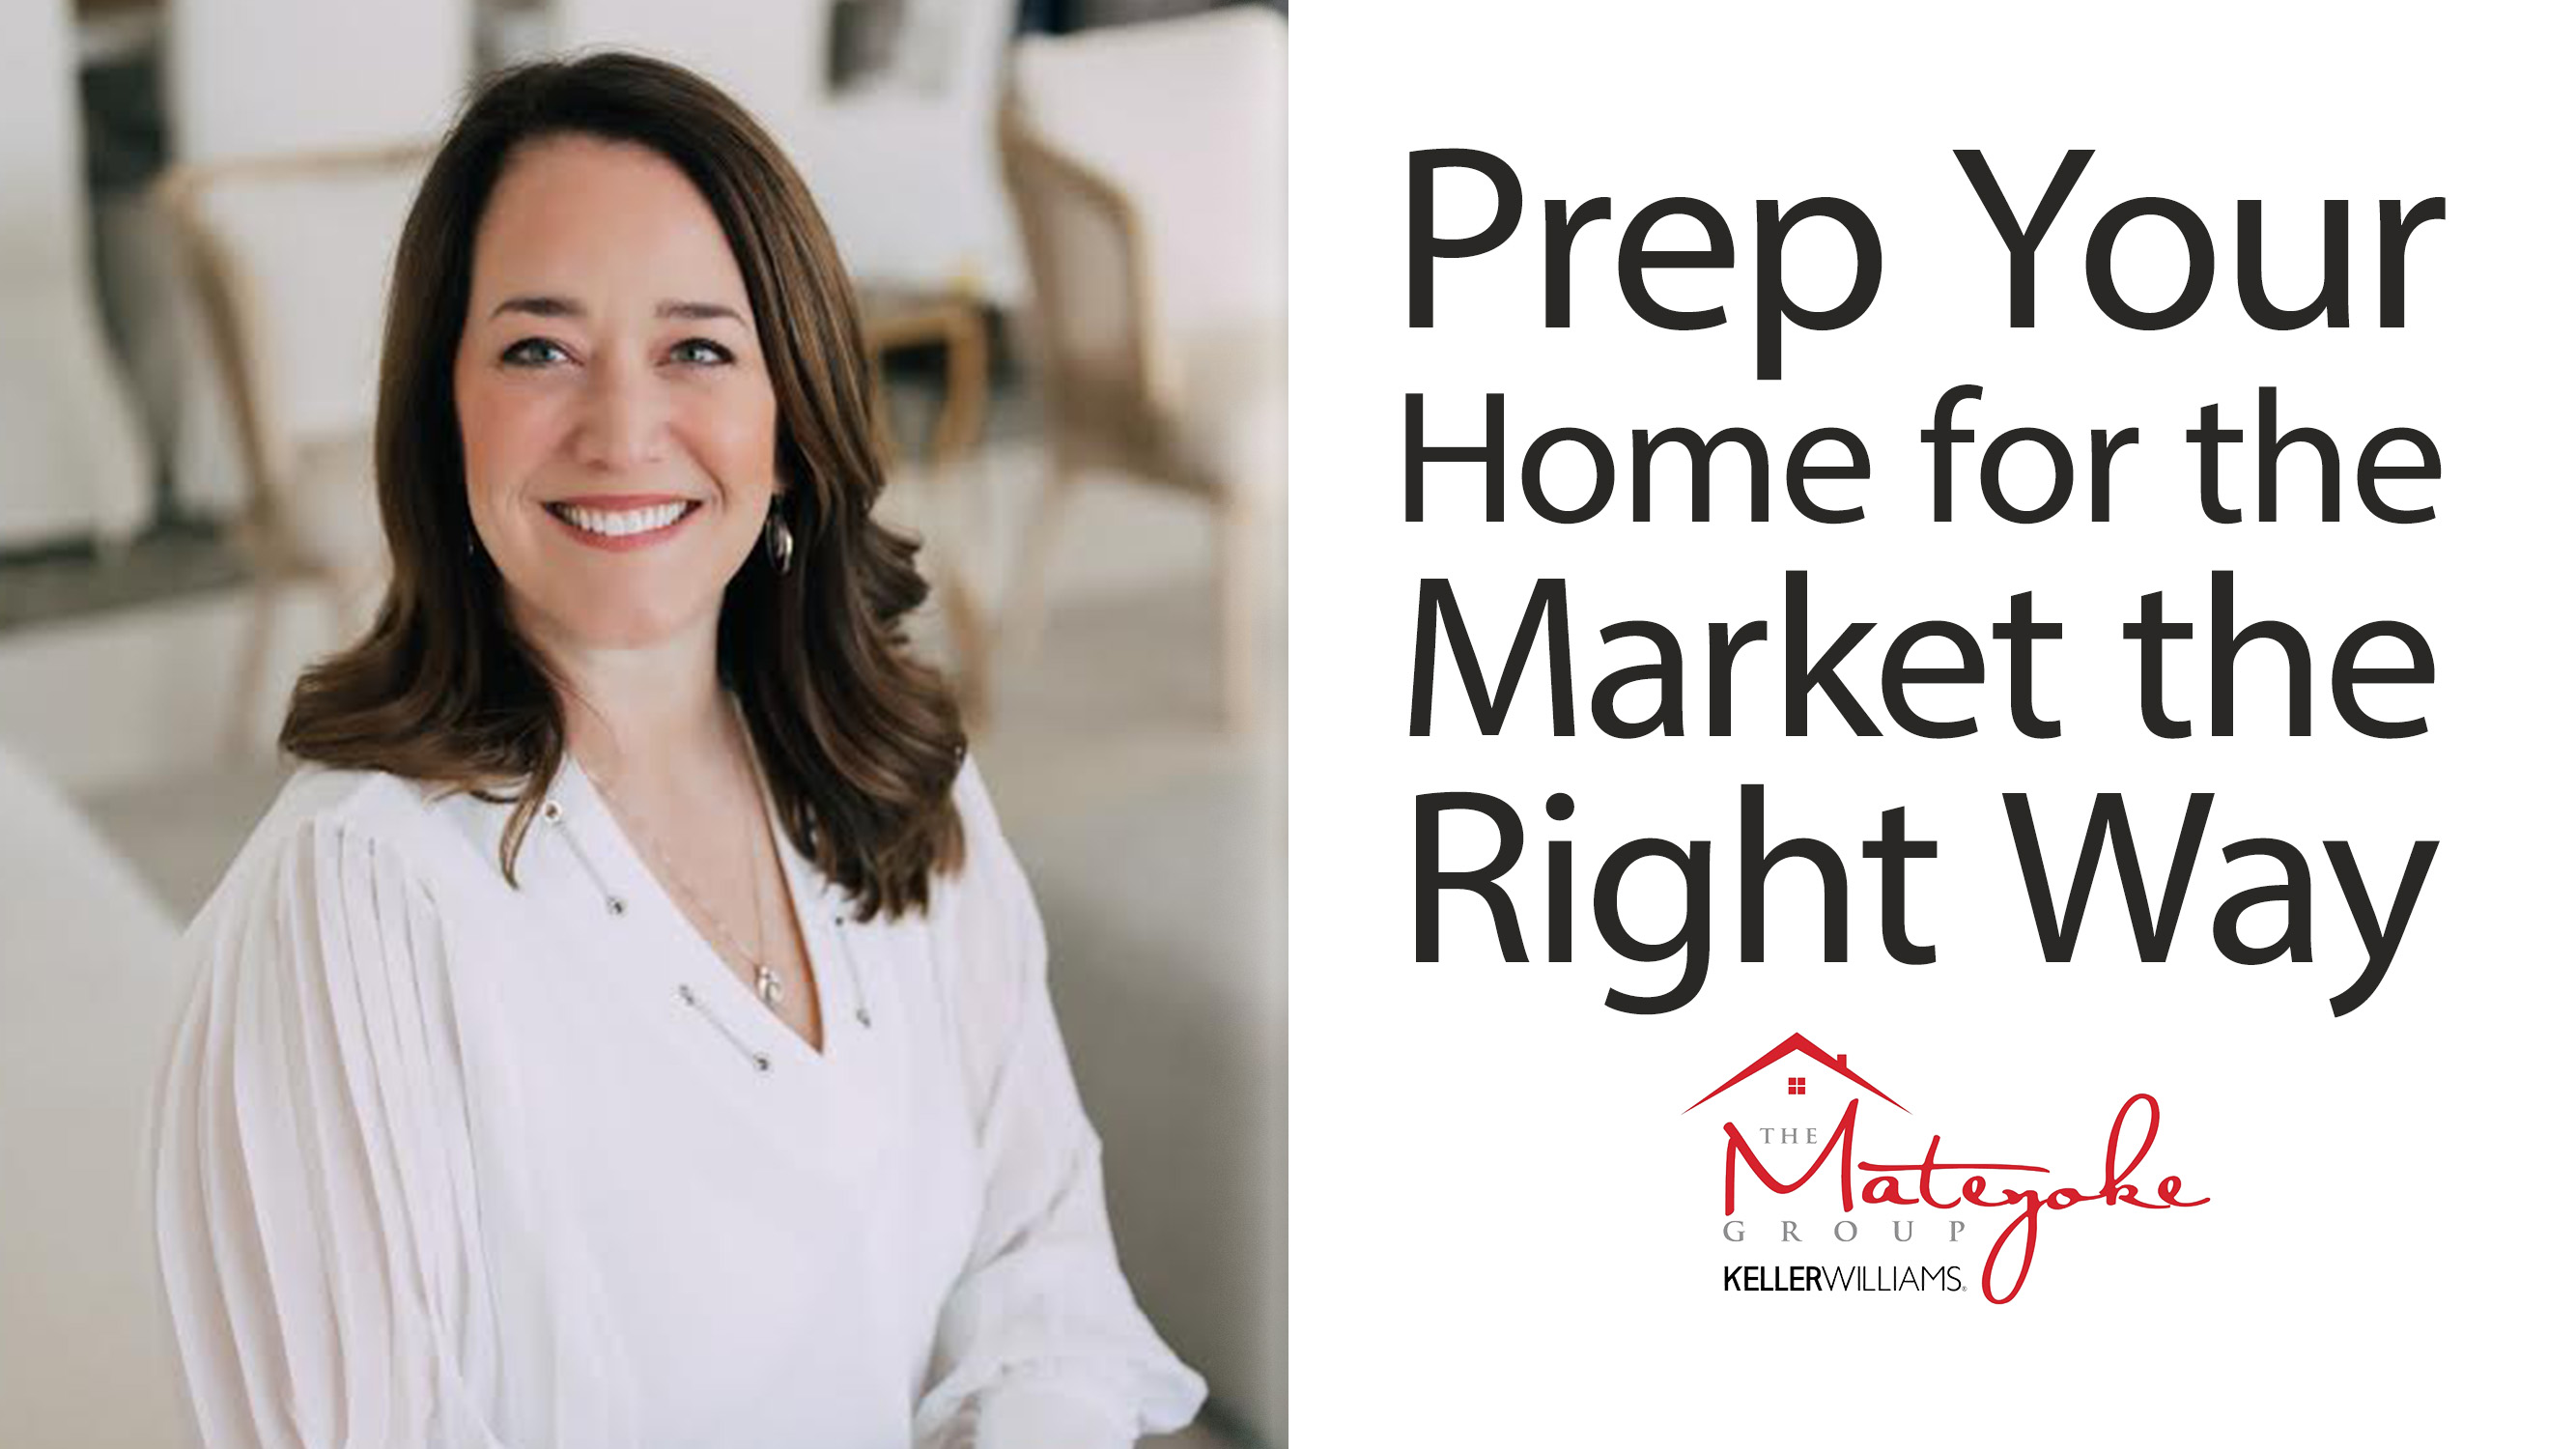 5 Key Tips to Prep Your Home for the Market